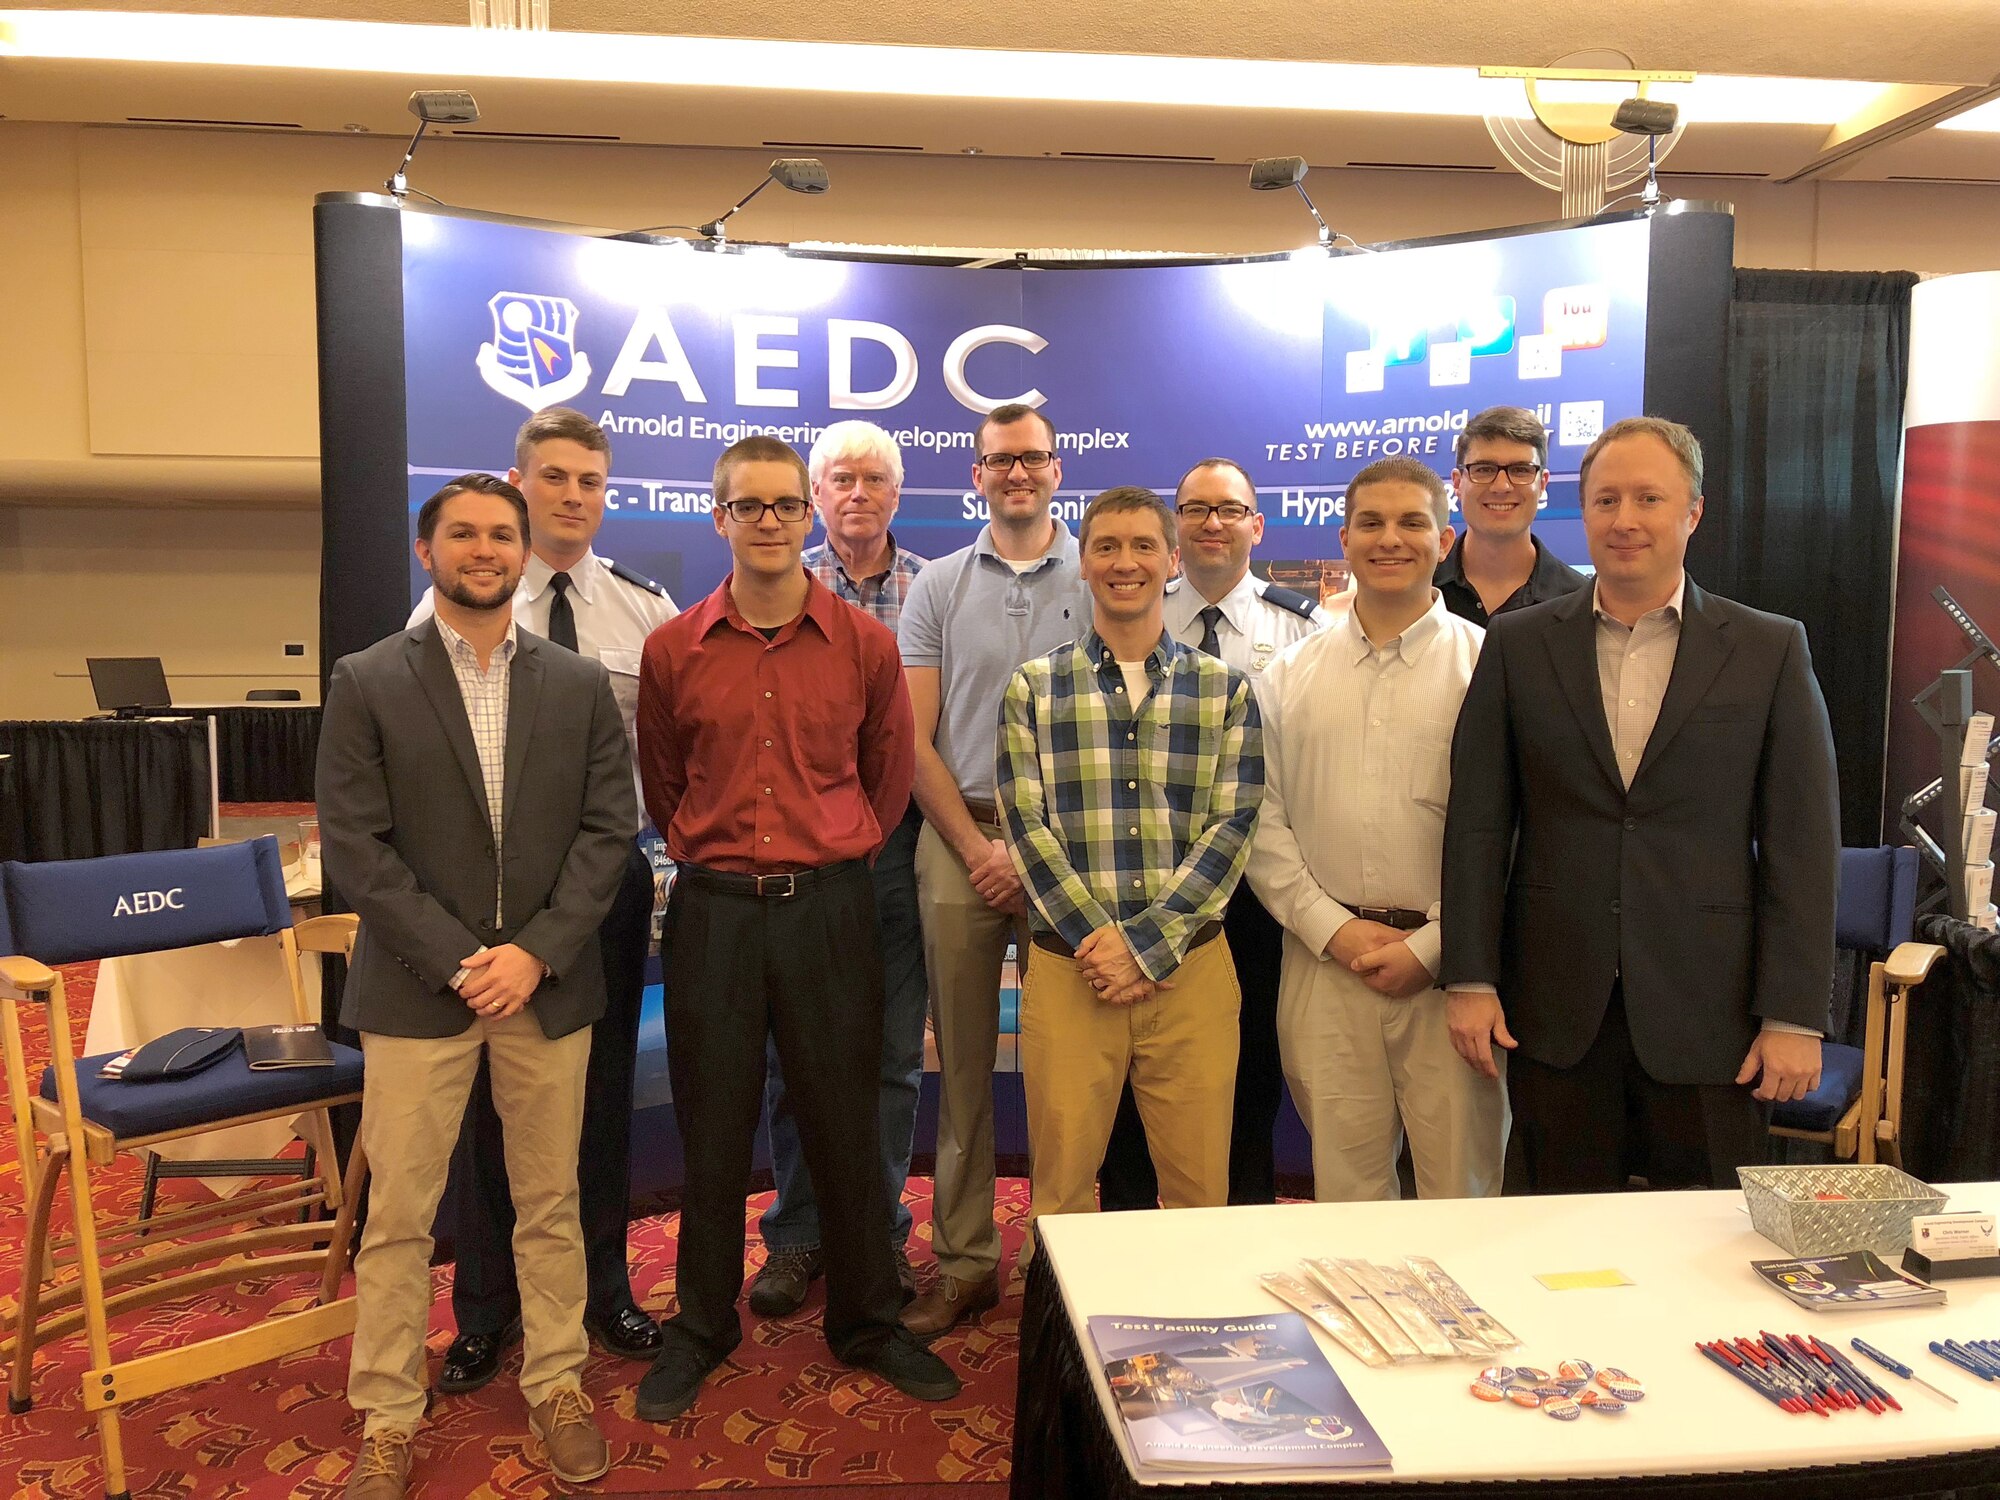 AEDC engineers represent Air Force Materiel Command at the 2018 National Space and Missiles Materiel Symposium held June 25-29 in Madison, Wisconsin. During the weeklong conference, several members of the AEDC team presented papers on the research and development occurring within the Space and Missiles Combined Test Force at Arnold Air Force Base. Pictured left to right: Benjamin Dolmovich, 1st Lt. Thomas Julian, Harry Clark, Bryan Sinkovec, Scott Williams, Jonathan Kodman, 1st Lt. Ryan Boudreaux, Nathan Tendick, Jon Rylan Cox and Edward Marshall Polk. Not pictured is Joseph Sheeley. (U.S. Air Force photo/Christopher Warner)